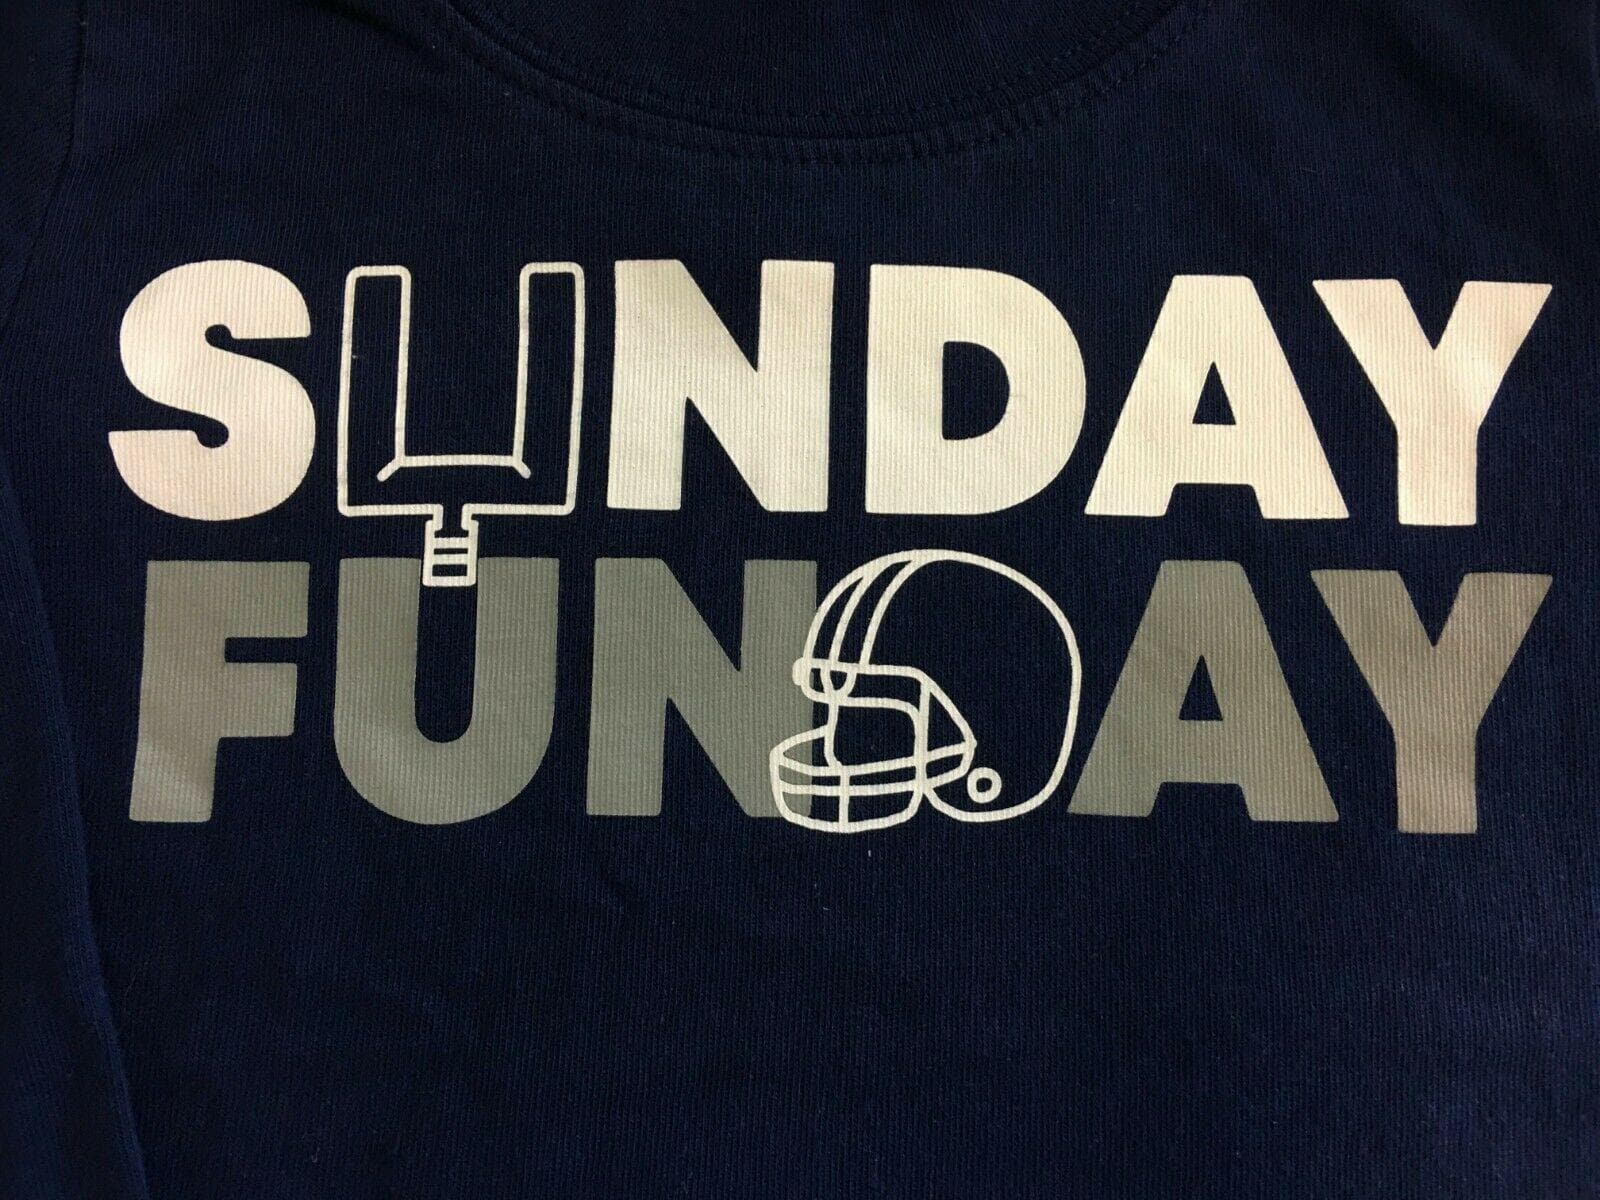 NFL NCAA American Football "Sunday FunDay" L/S T-Shirt Infant 6 Months